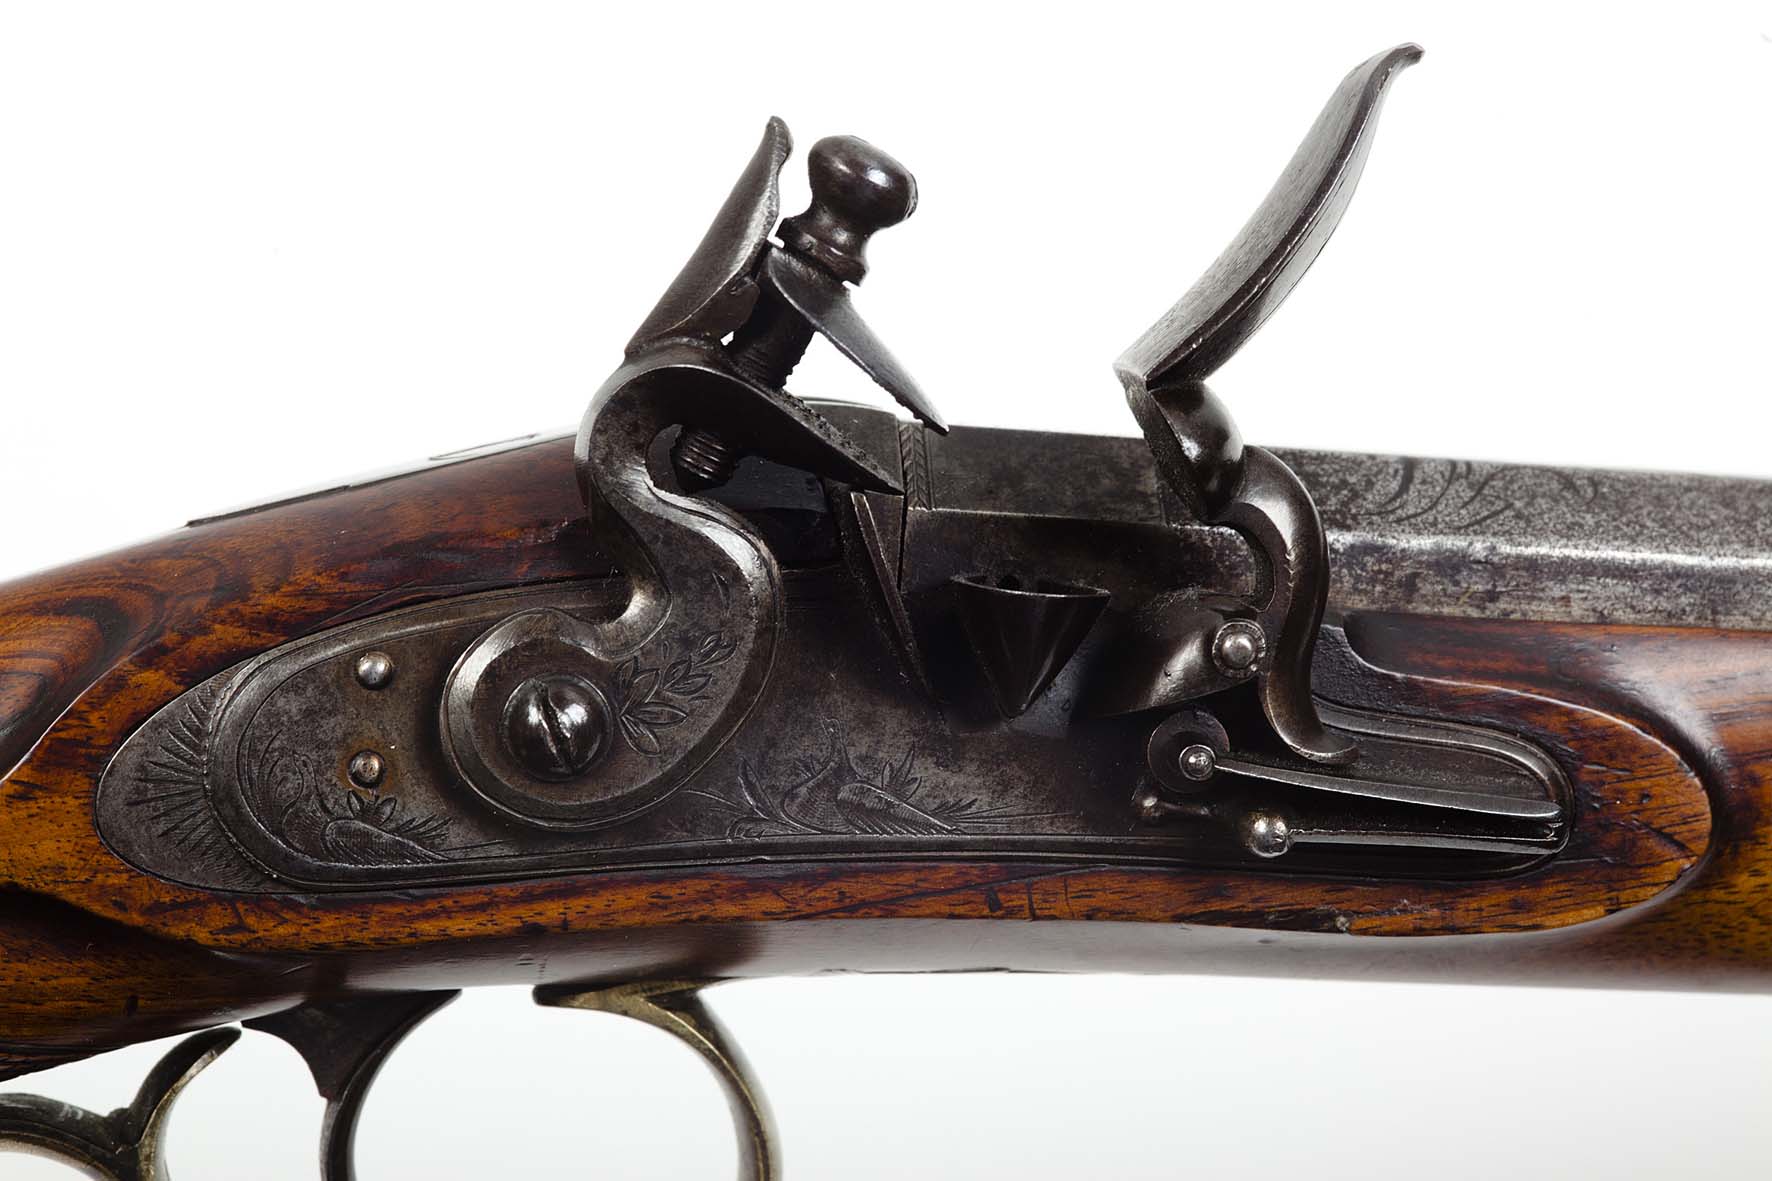 Detail of Gunna Breac ('speckled gun') dating from 1690